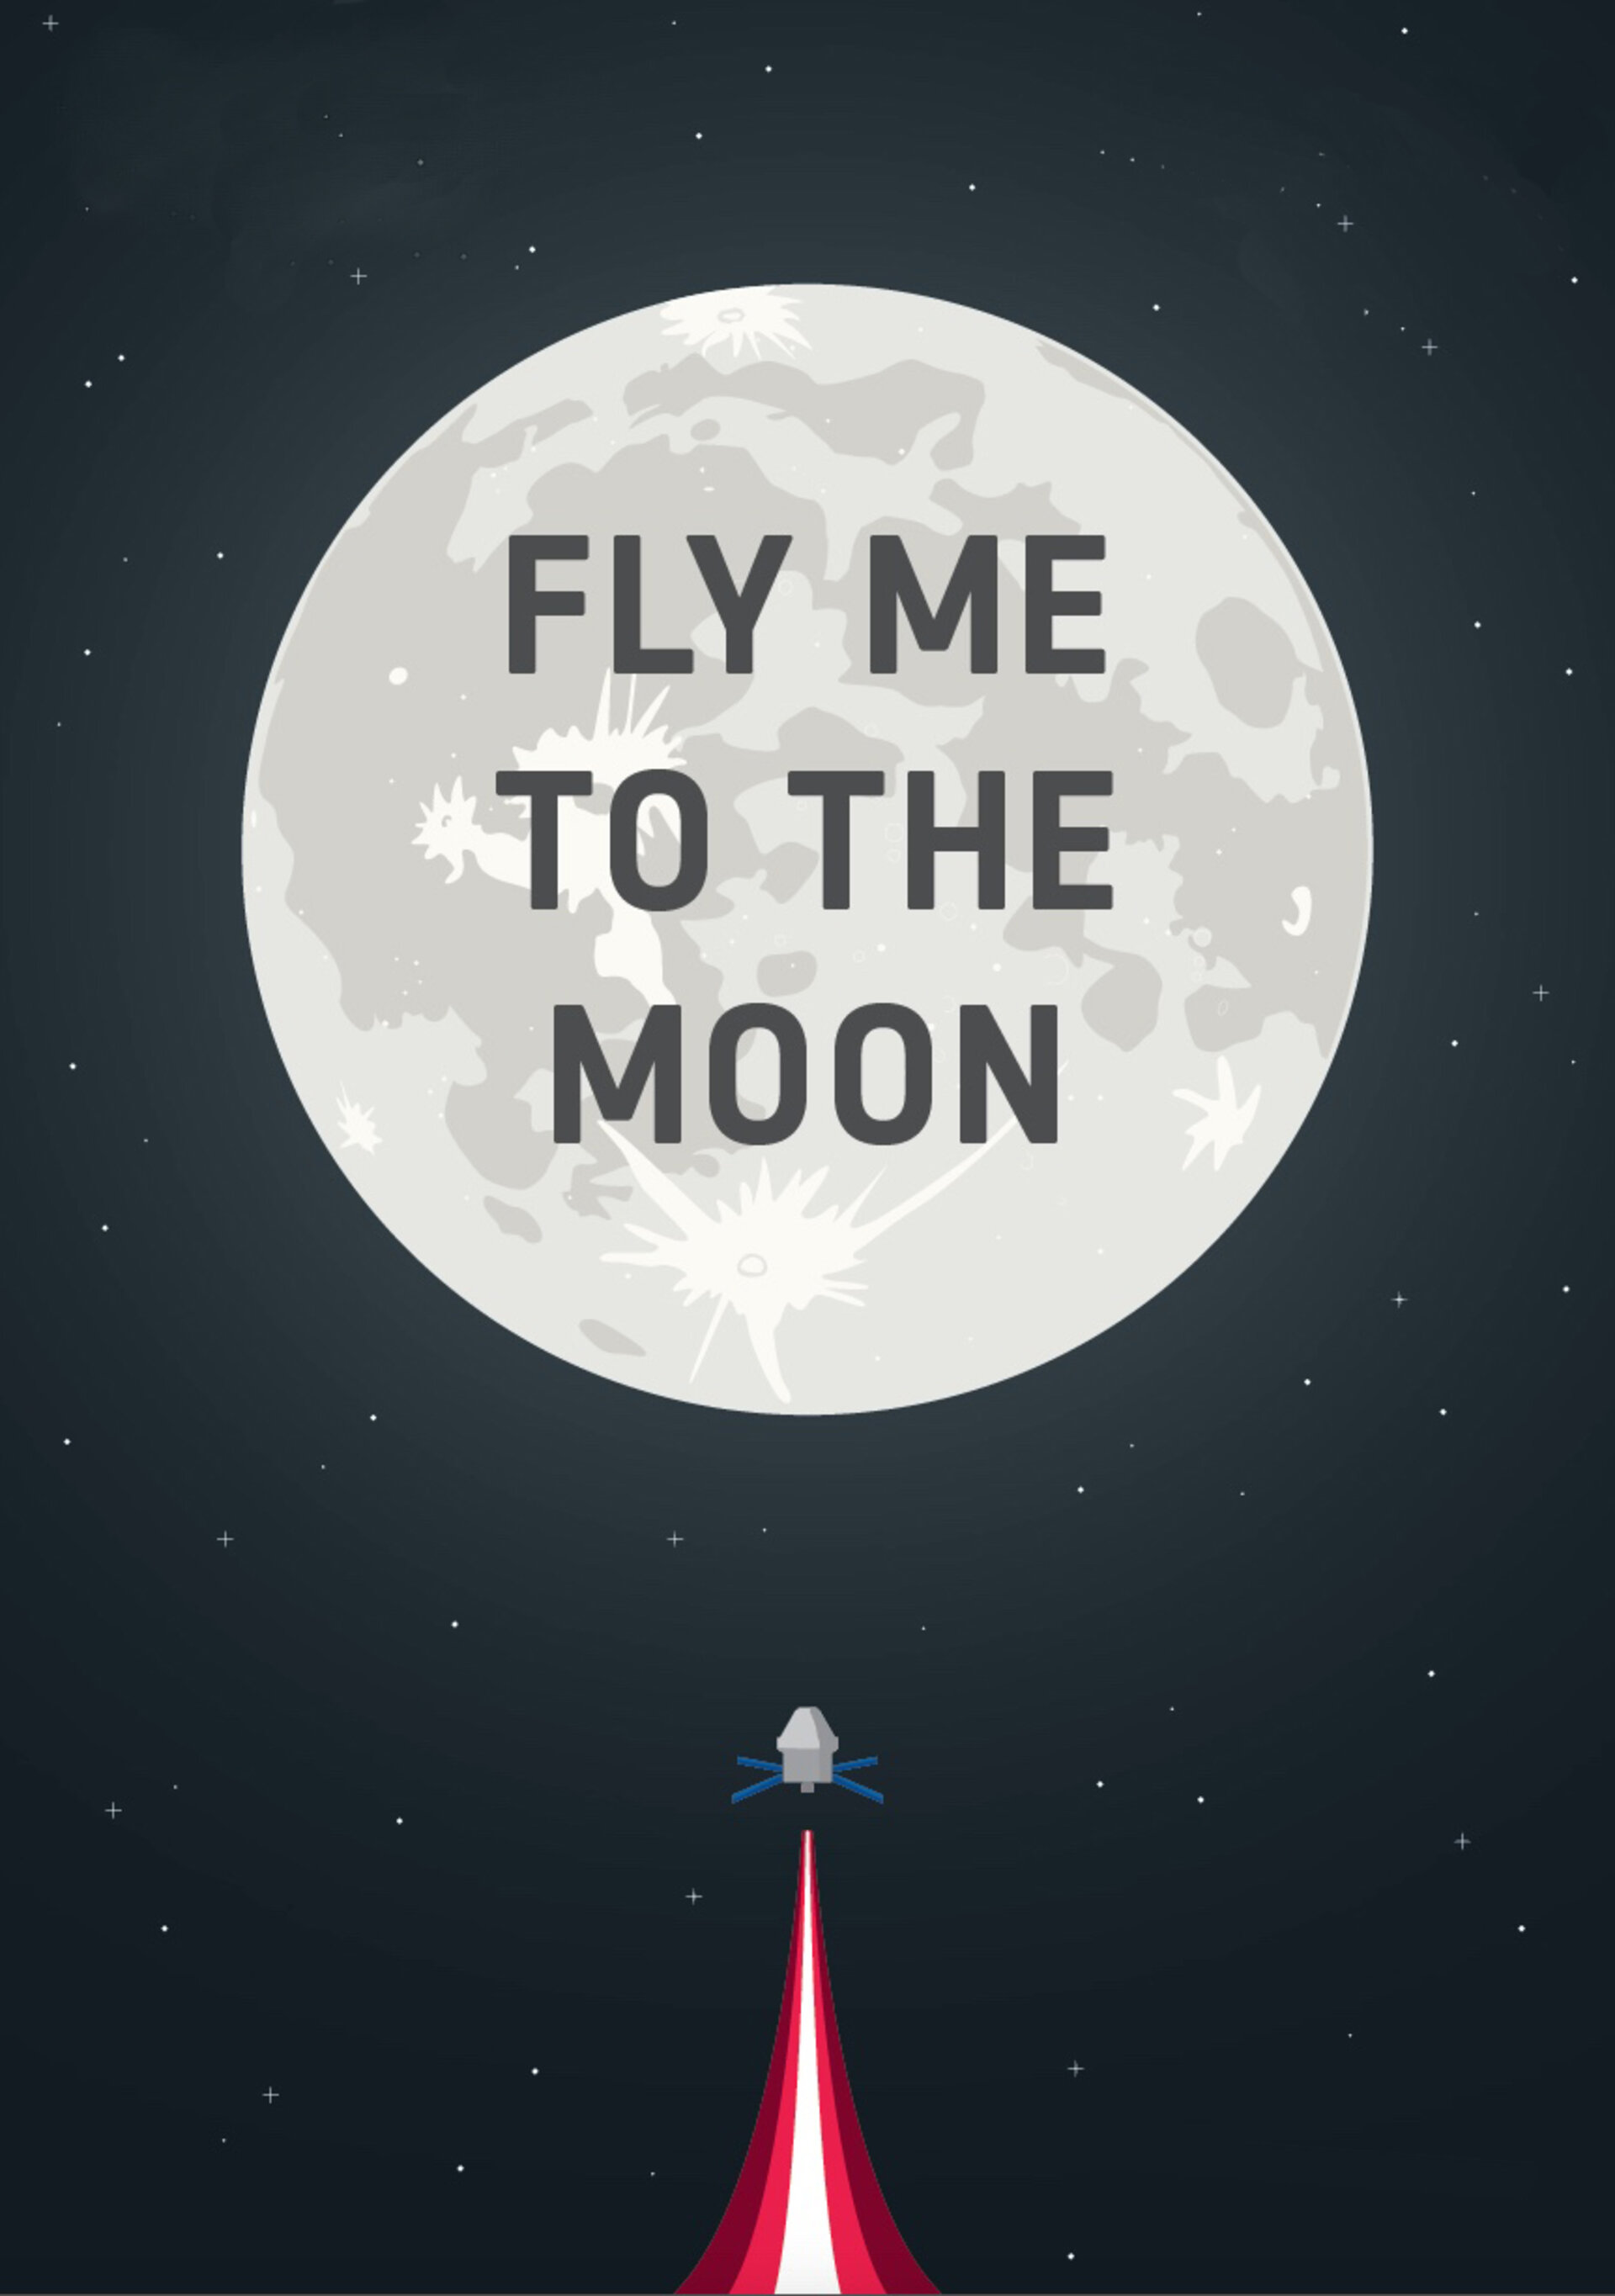 ESA 'Fly me to the Moon' marking the 50th anniversary of the first